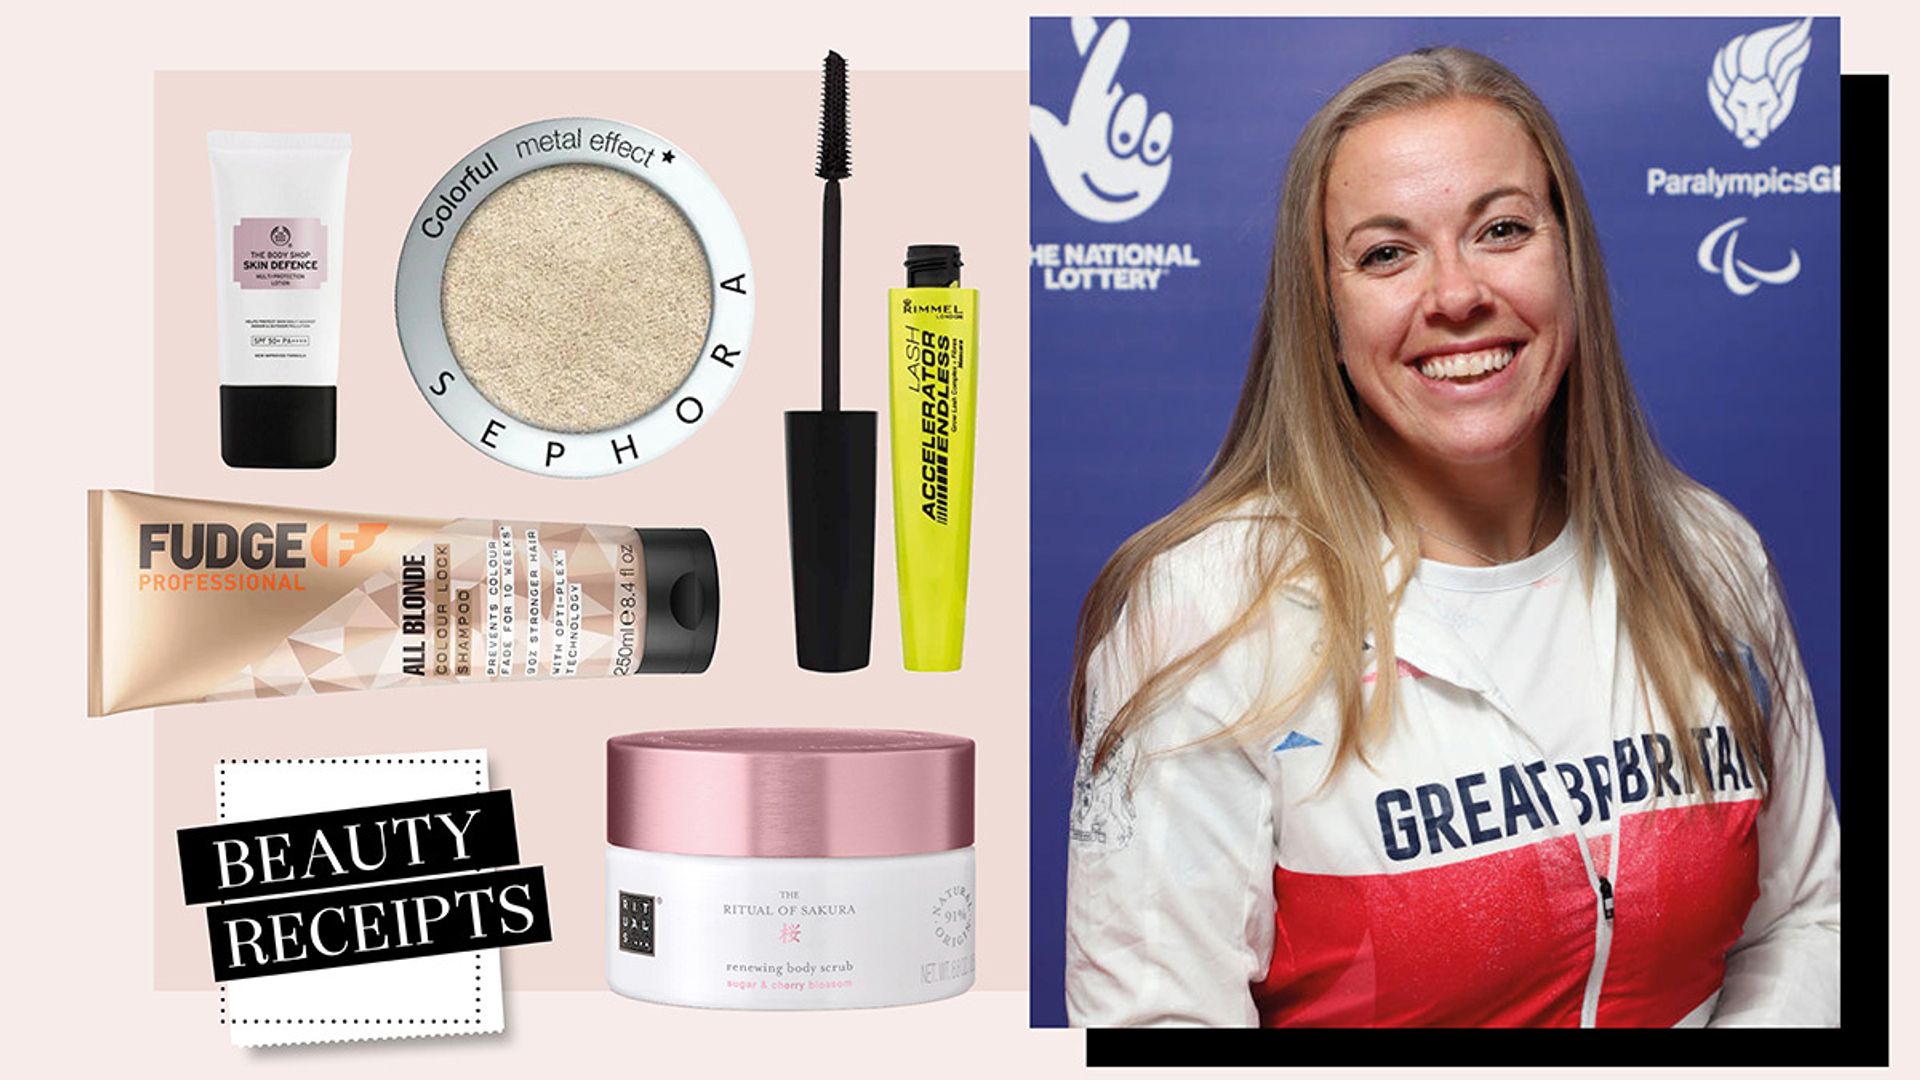 Beauty receipts: What Hannah Cockroft's monthly beauty routine looks like